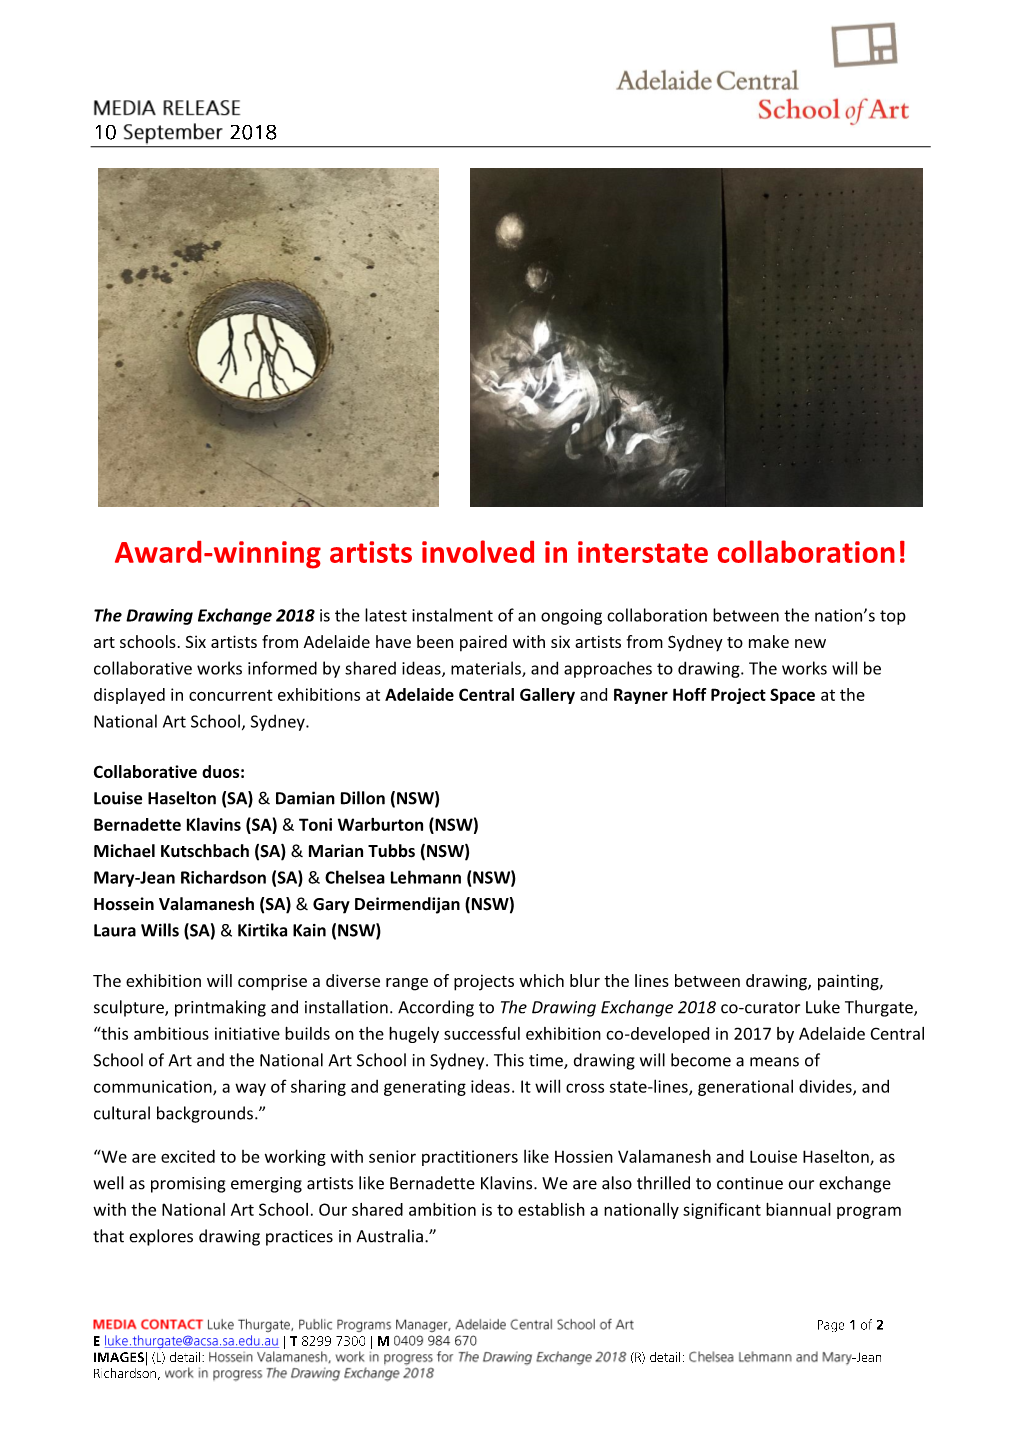 Award-Winning Artists Involved in Interstate Collaboration!